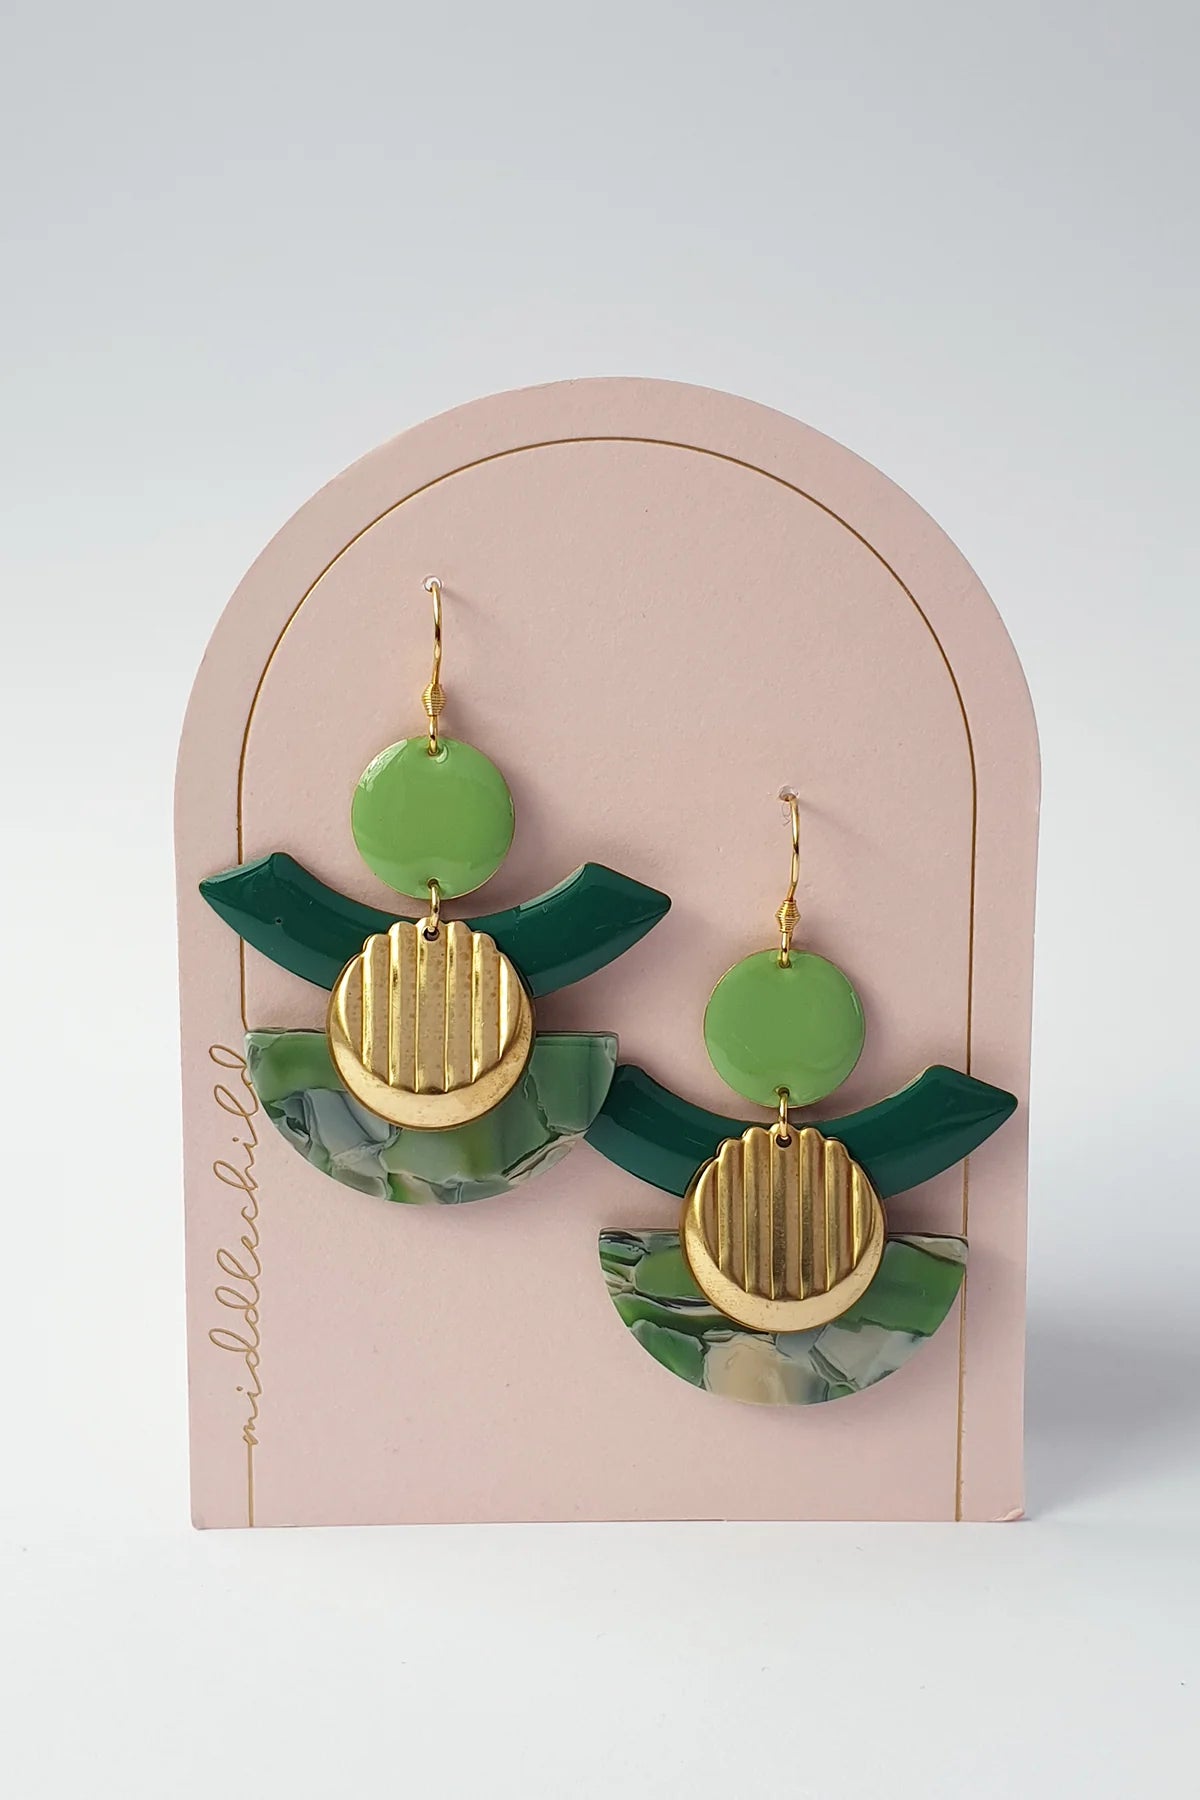 Middle Child - Manifest Earrings